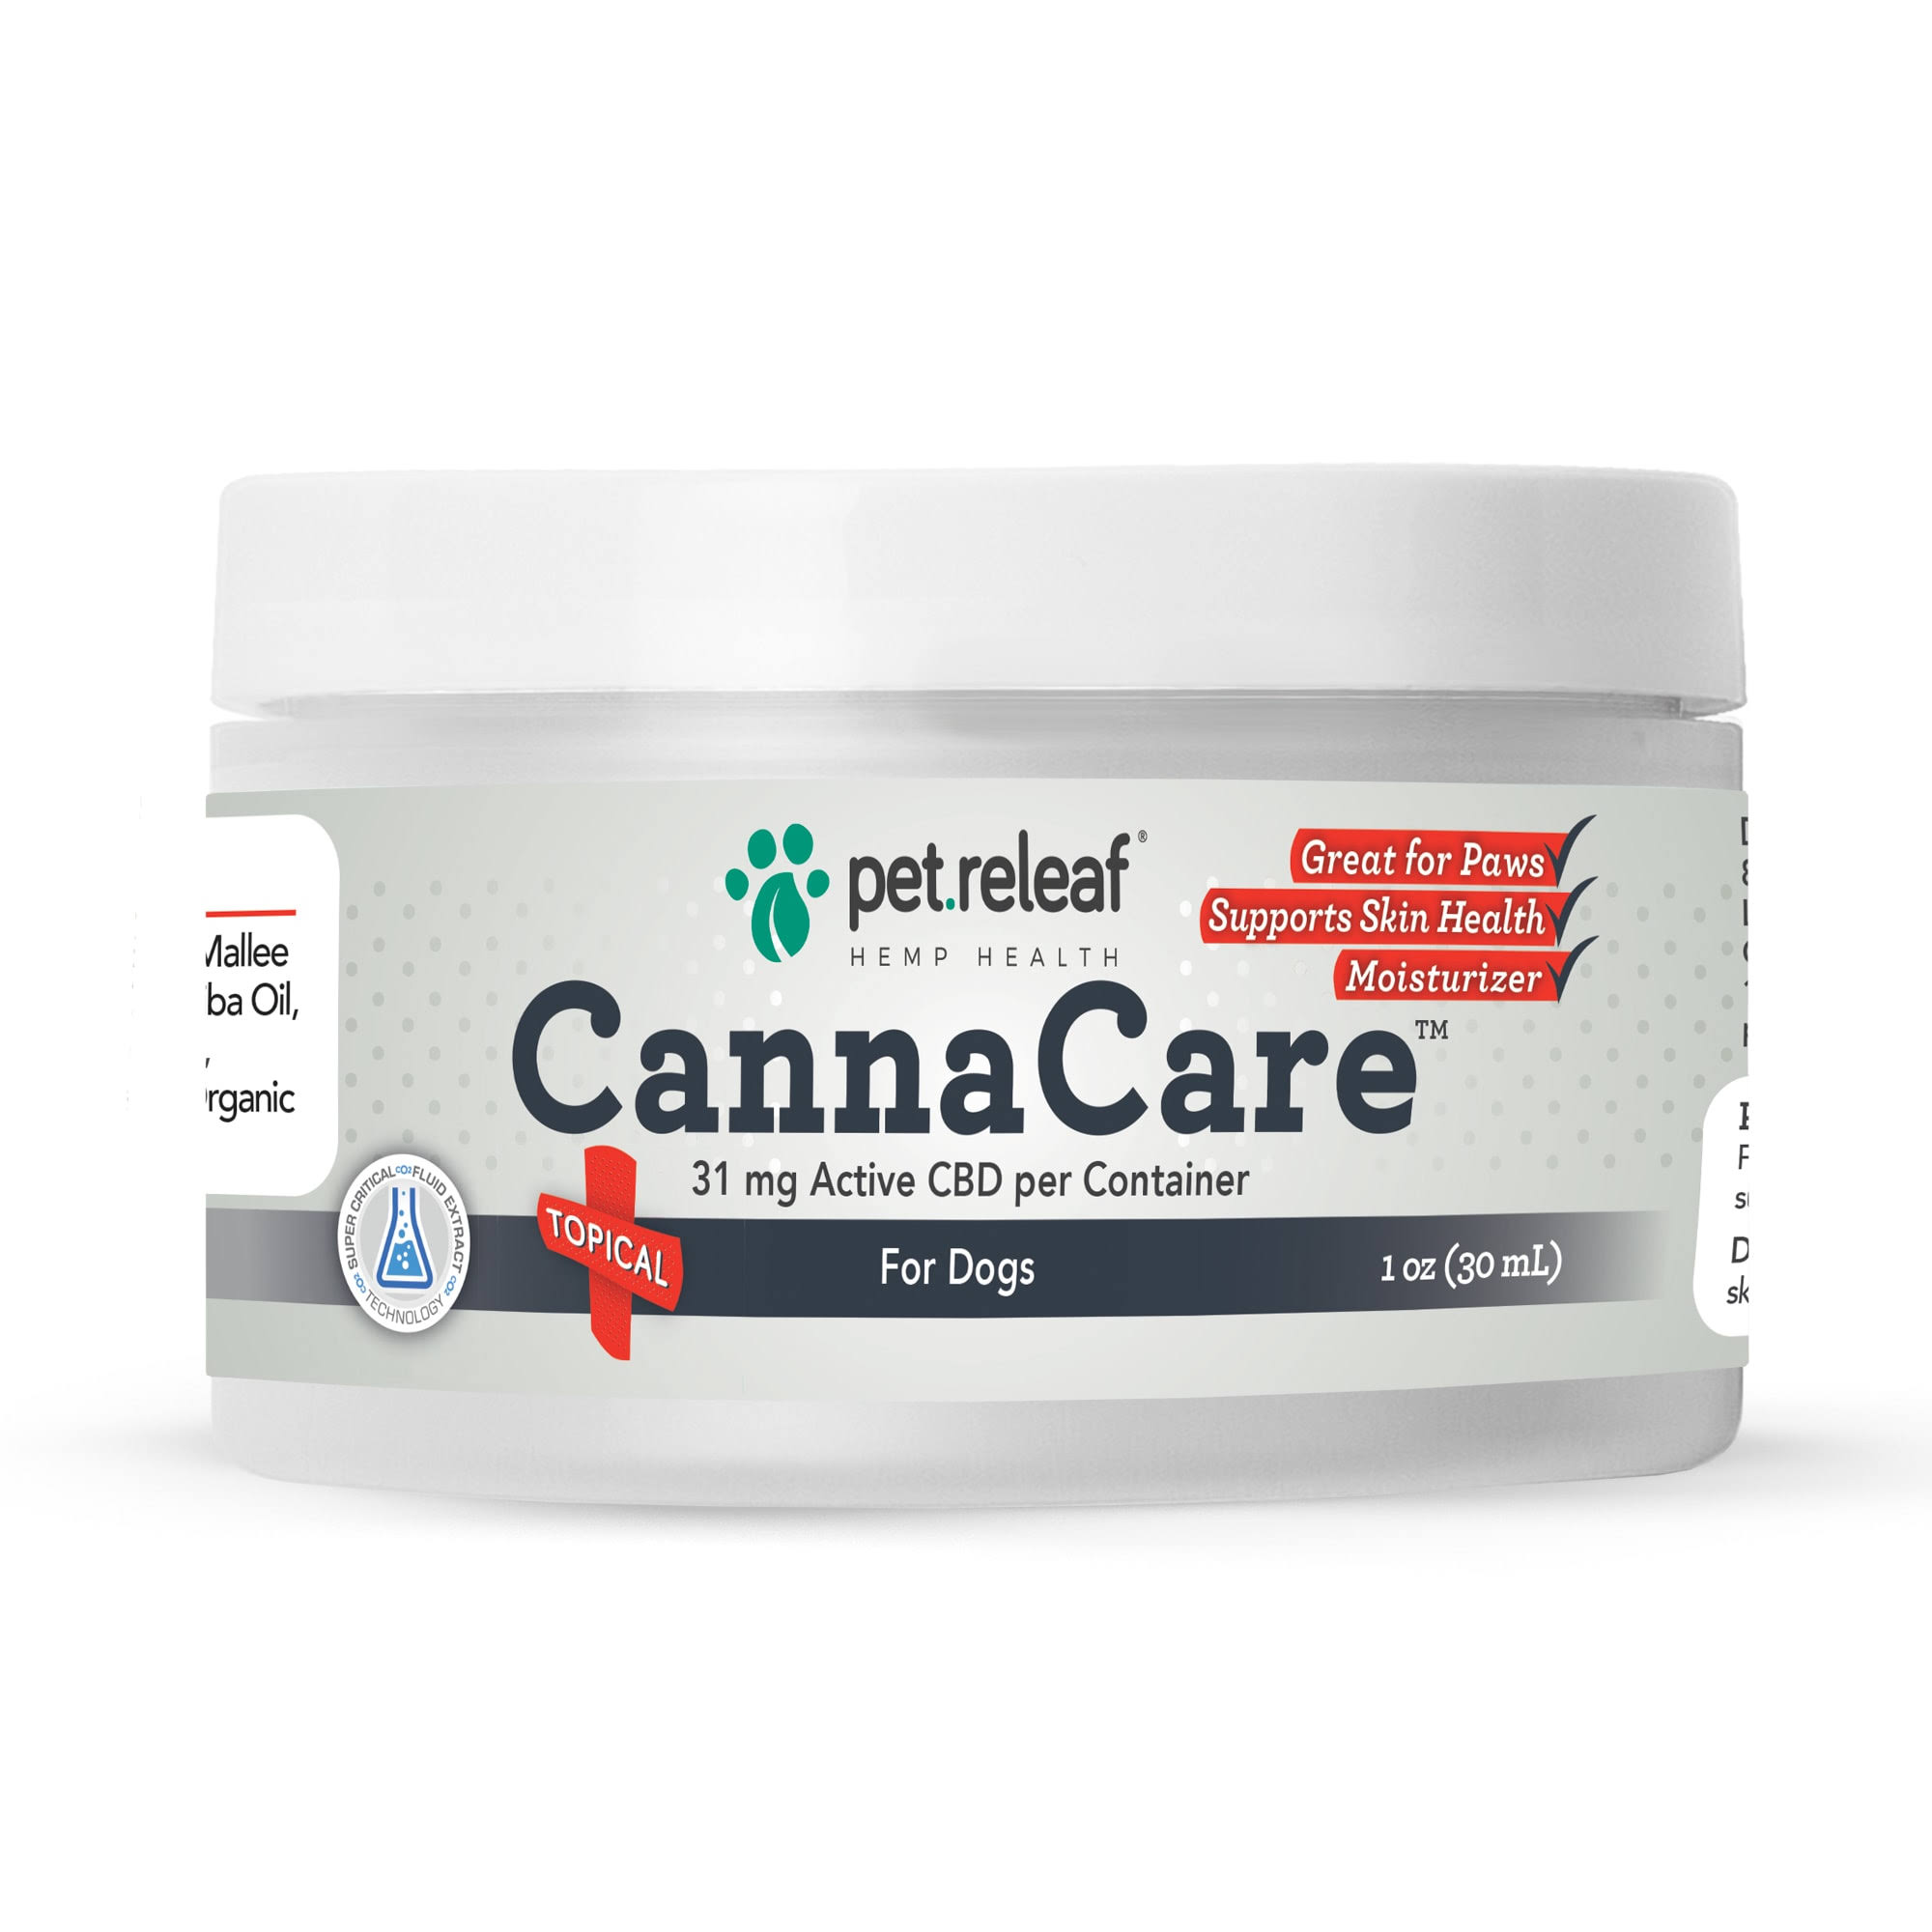 Pet Releaf Canna Care Topical for Dogs, 1 oz.